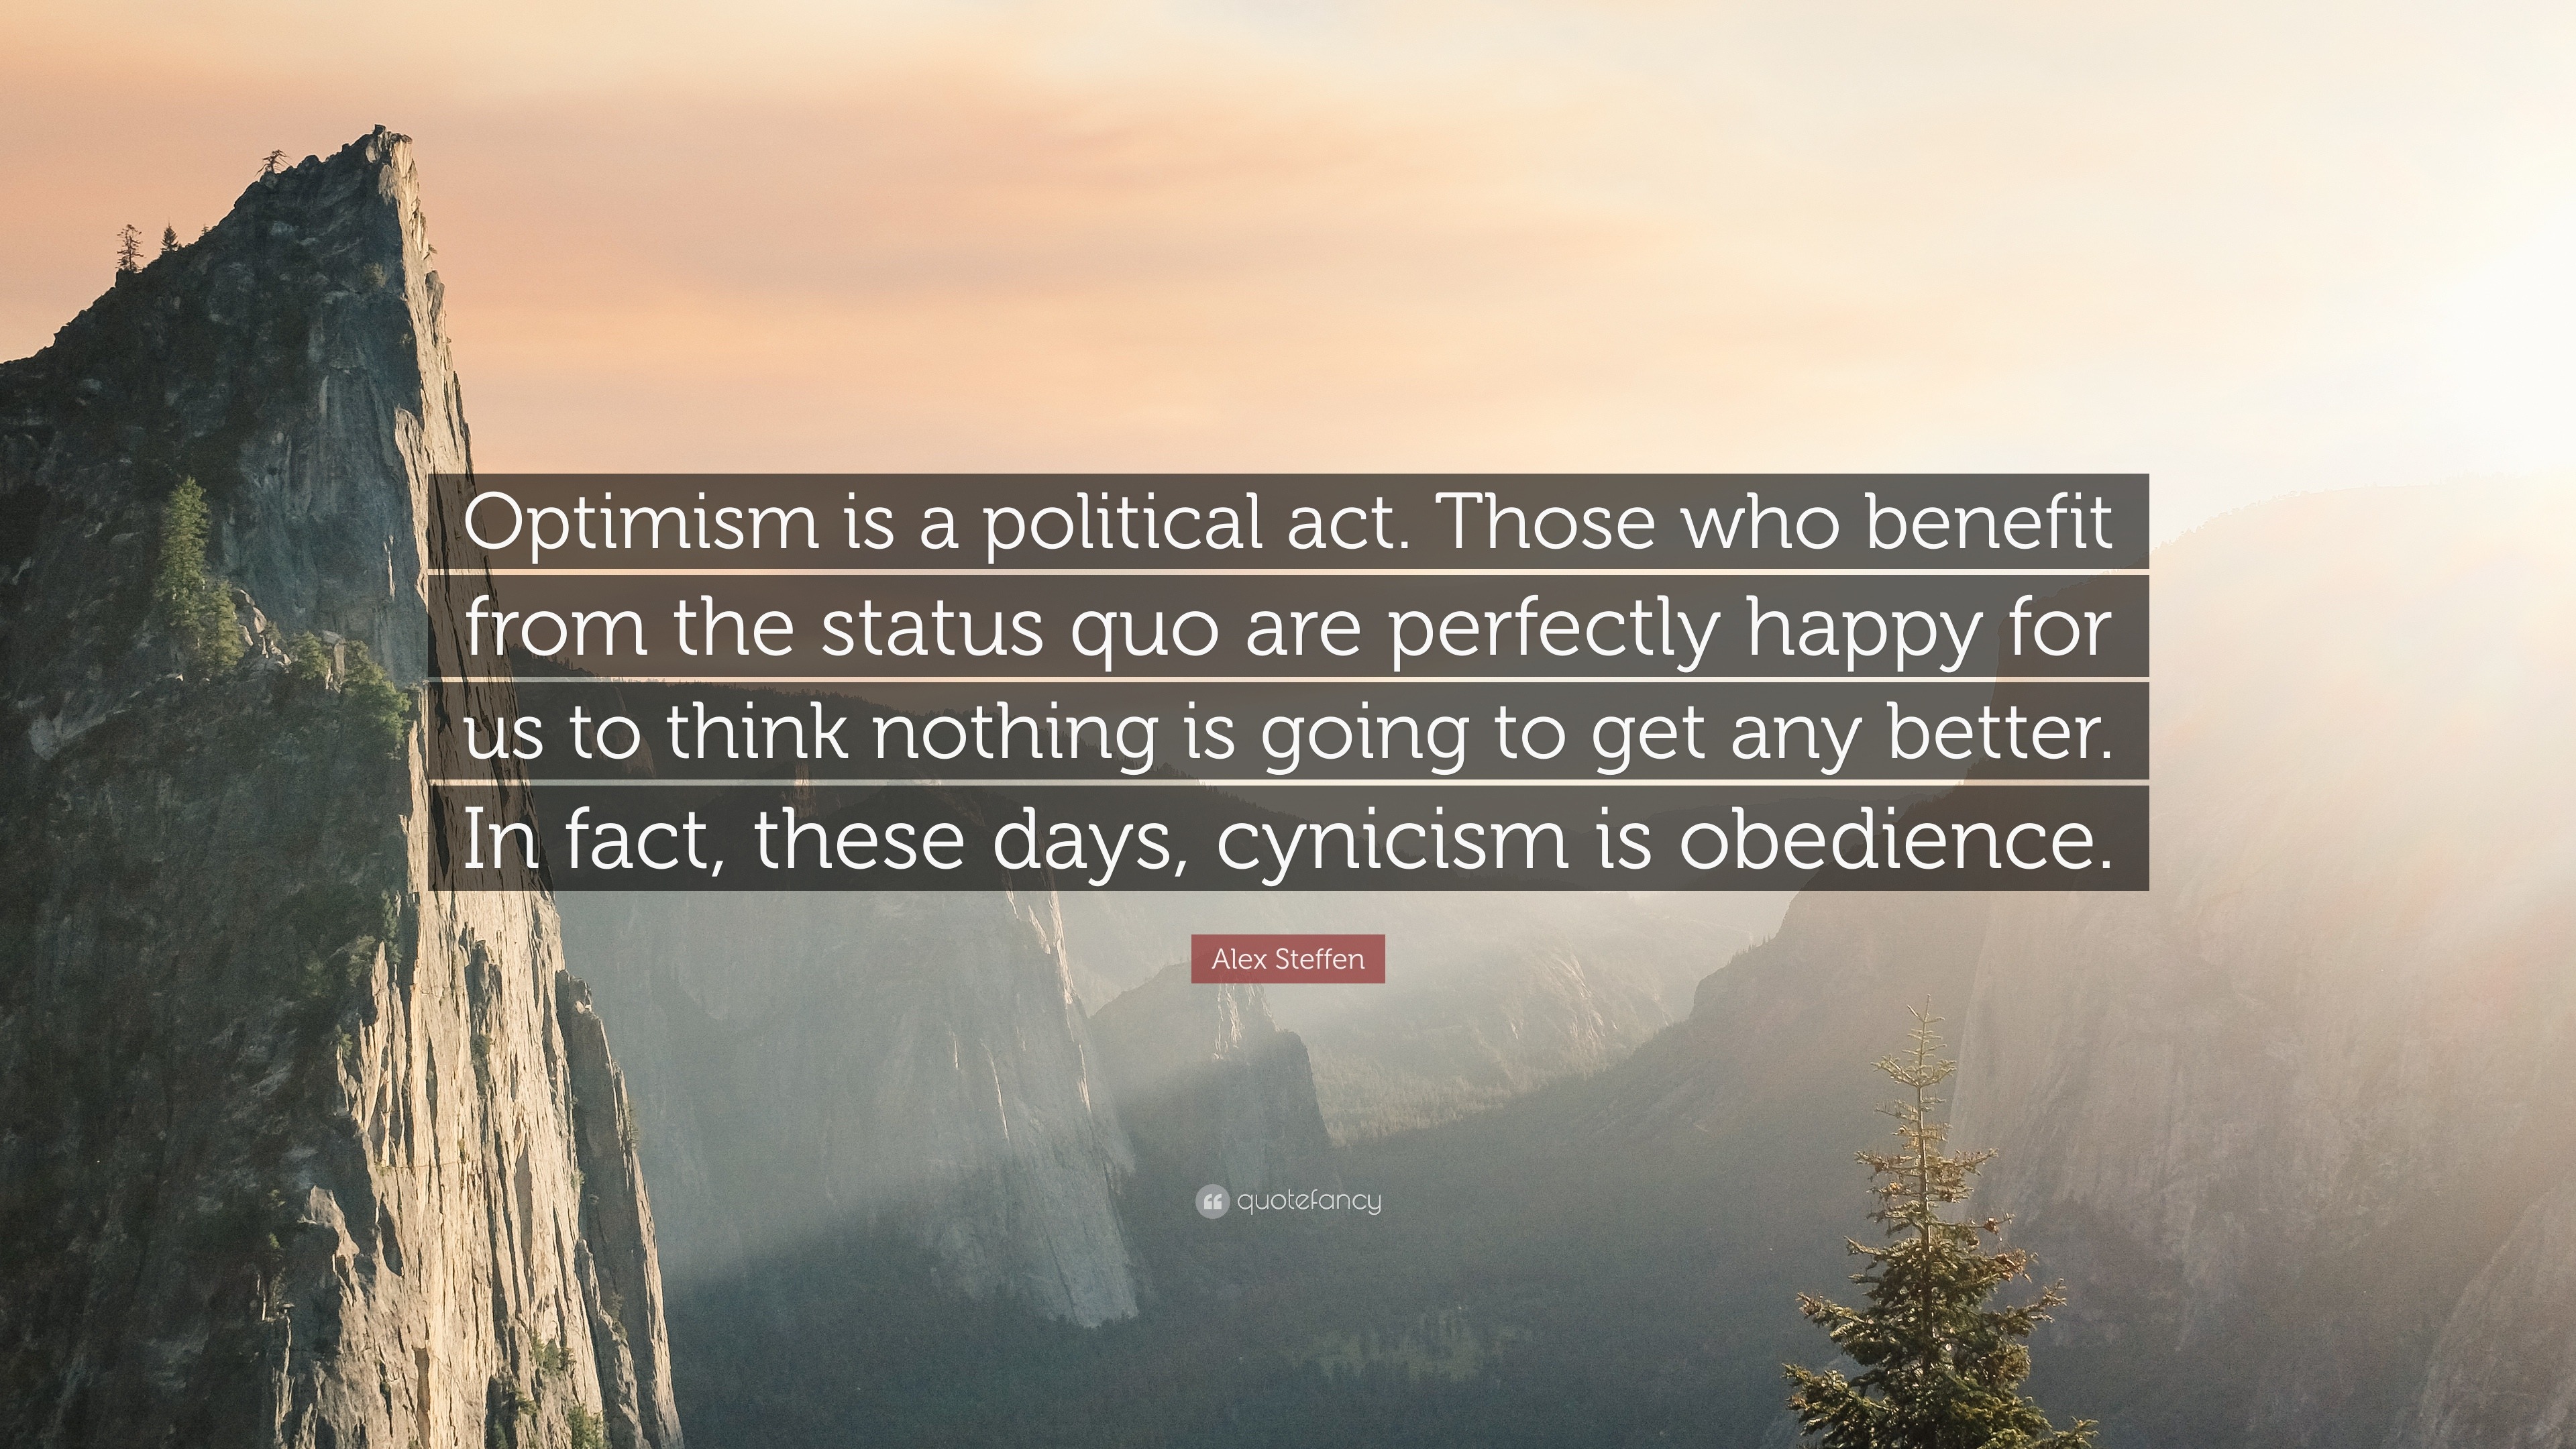 https://quotefancy.com/media/wallpaper/3840x2160/1105065-Alex-Steffen-Quote-Optimism-is-a-political-act-Those-who-benefit.jpg